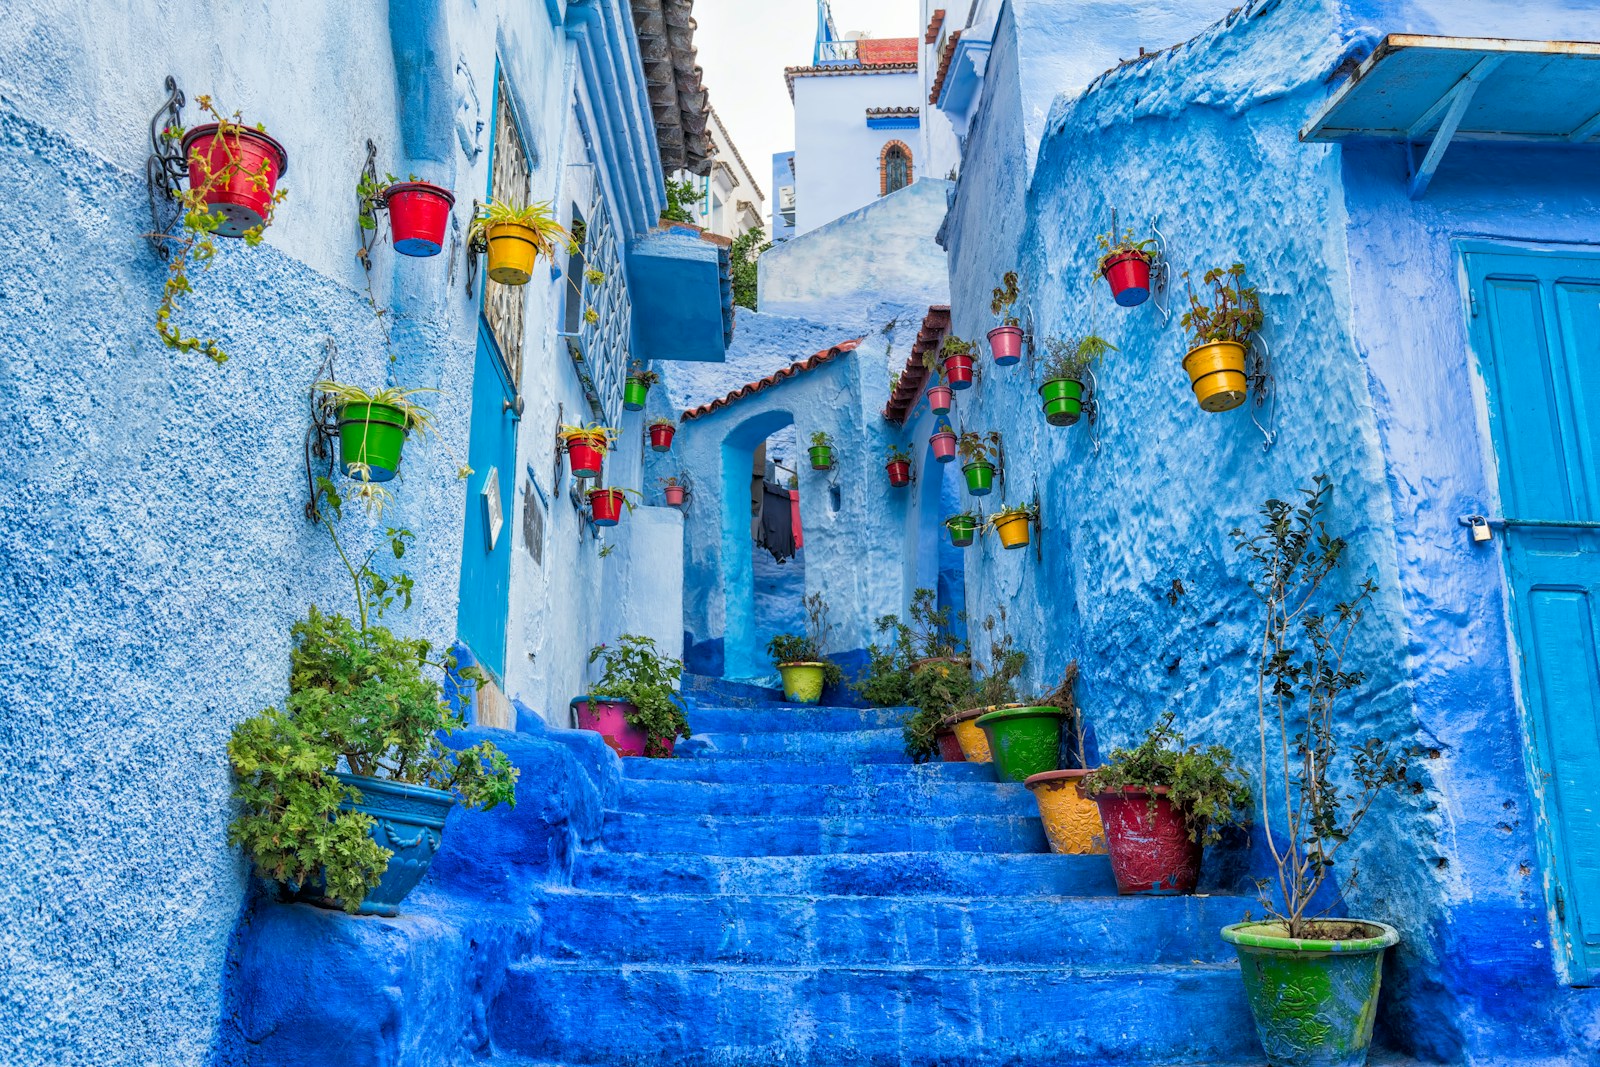 Planning your trip to Morocco